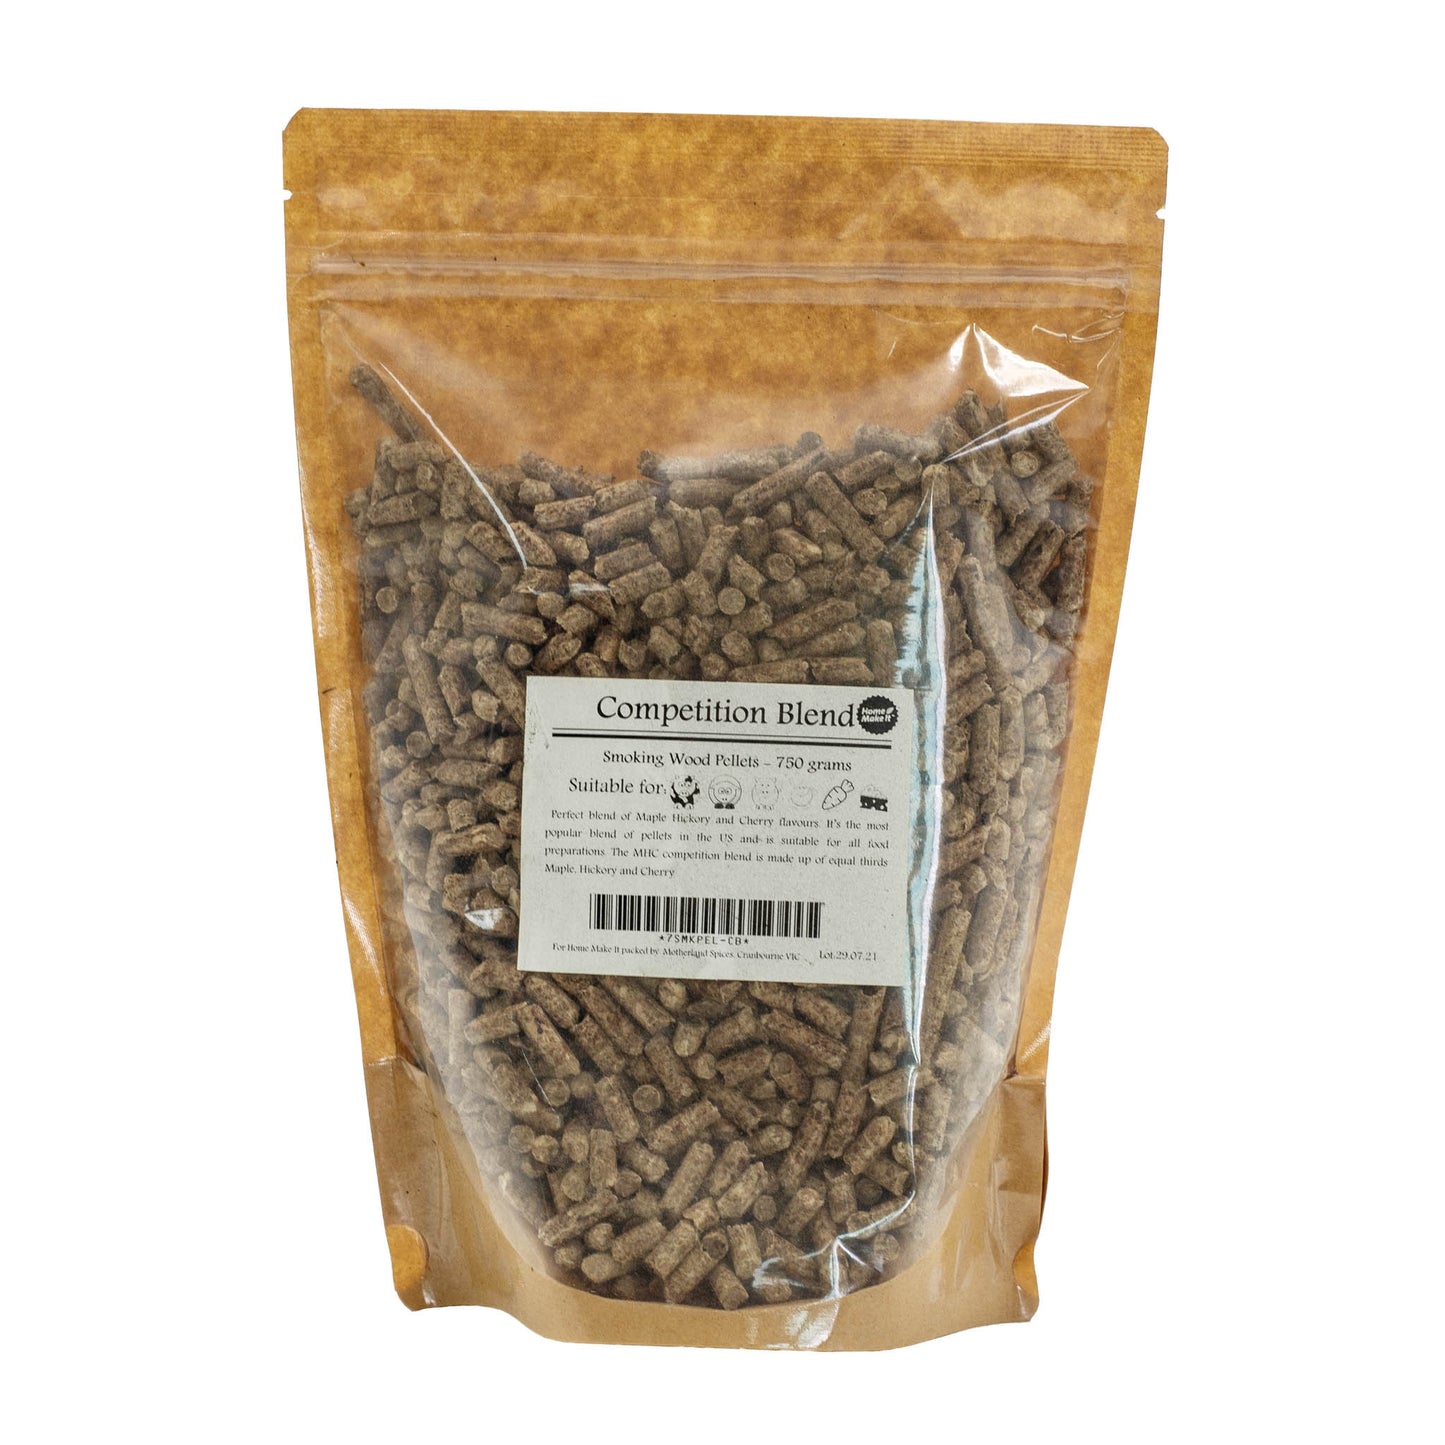 750 gram bag of competition blend smoking pellets. Suitable for all meats and vegetables. Great for cold smokers. 